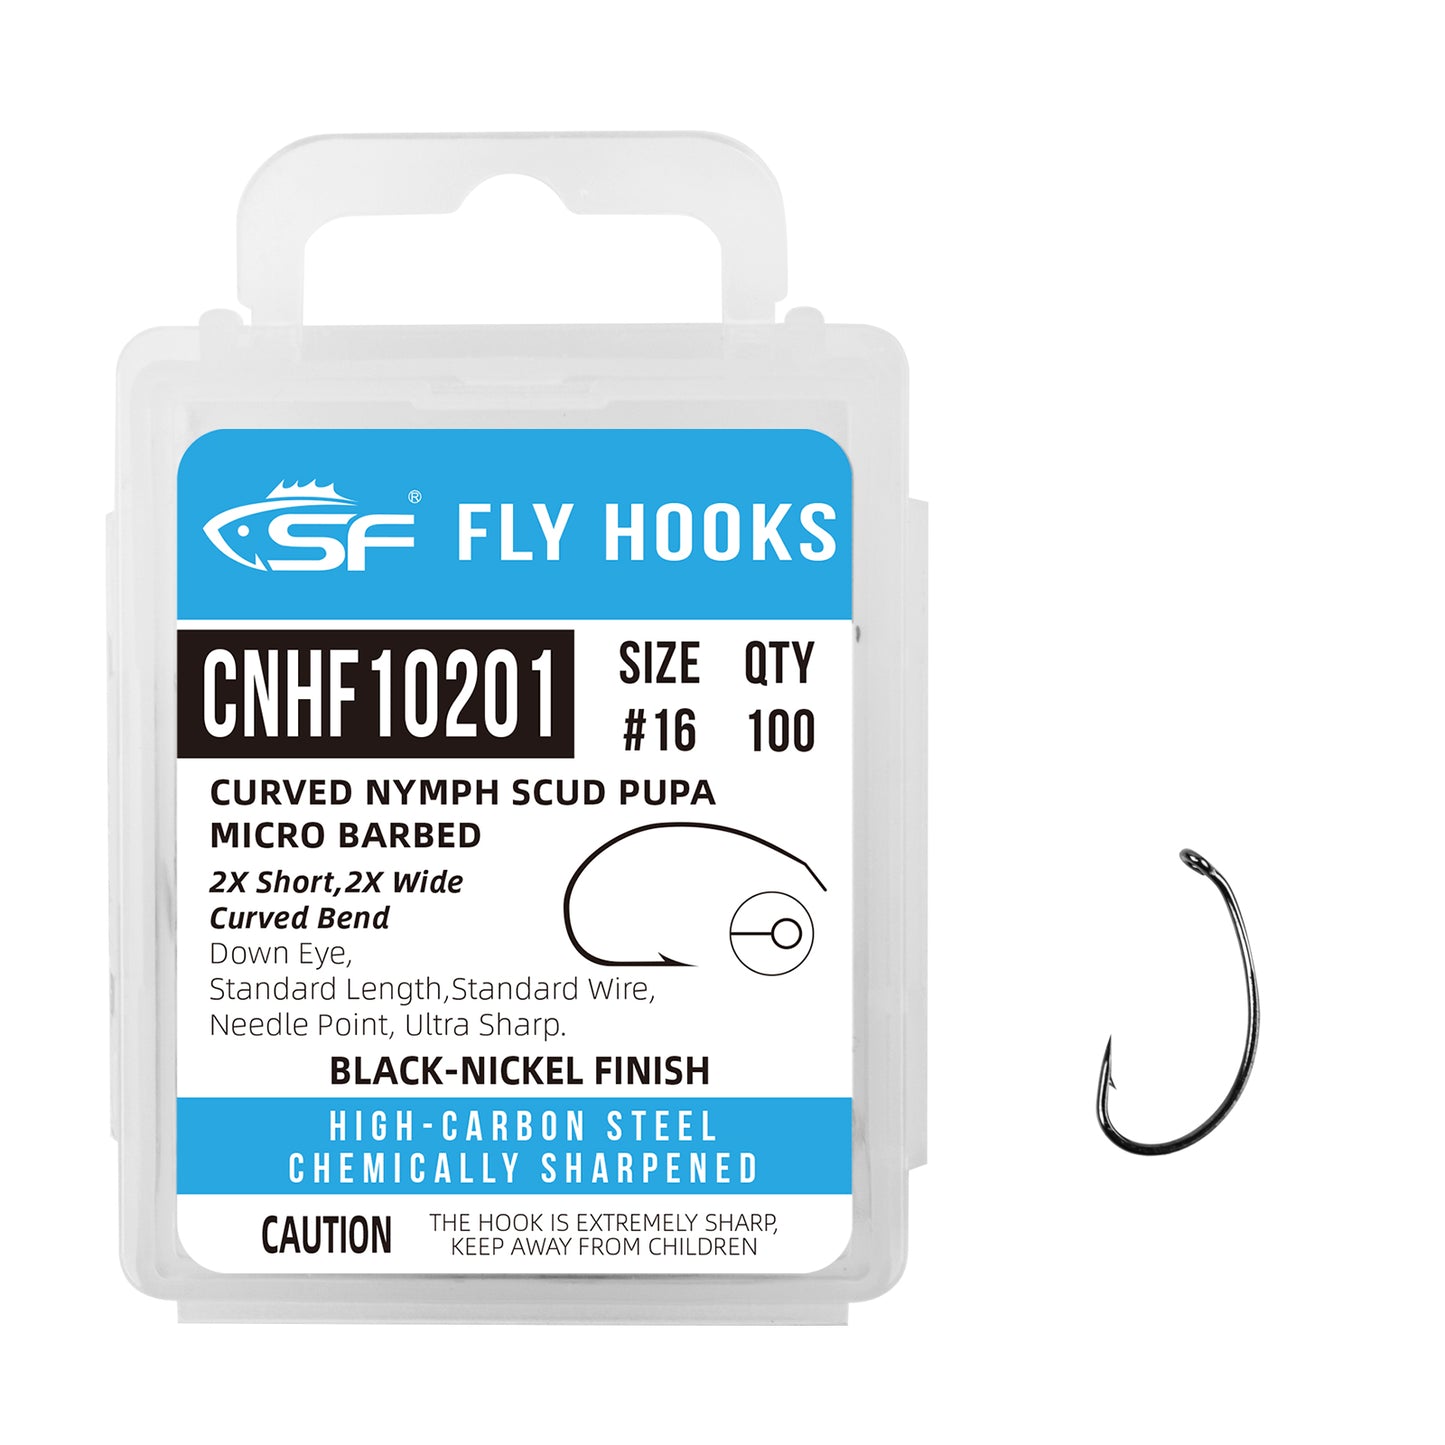 SF Curved Nymph Scud Pupa Fly Tying Hooks Micro Barbed Black